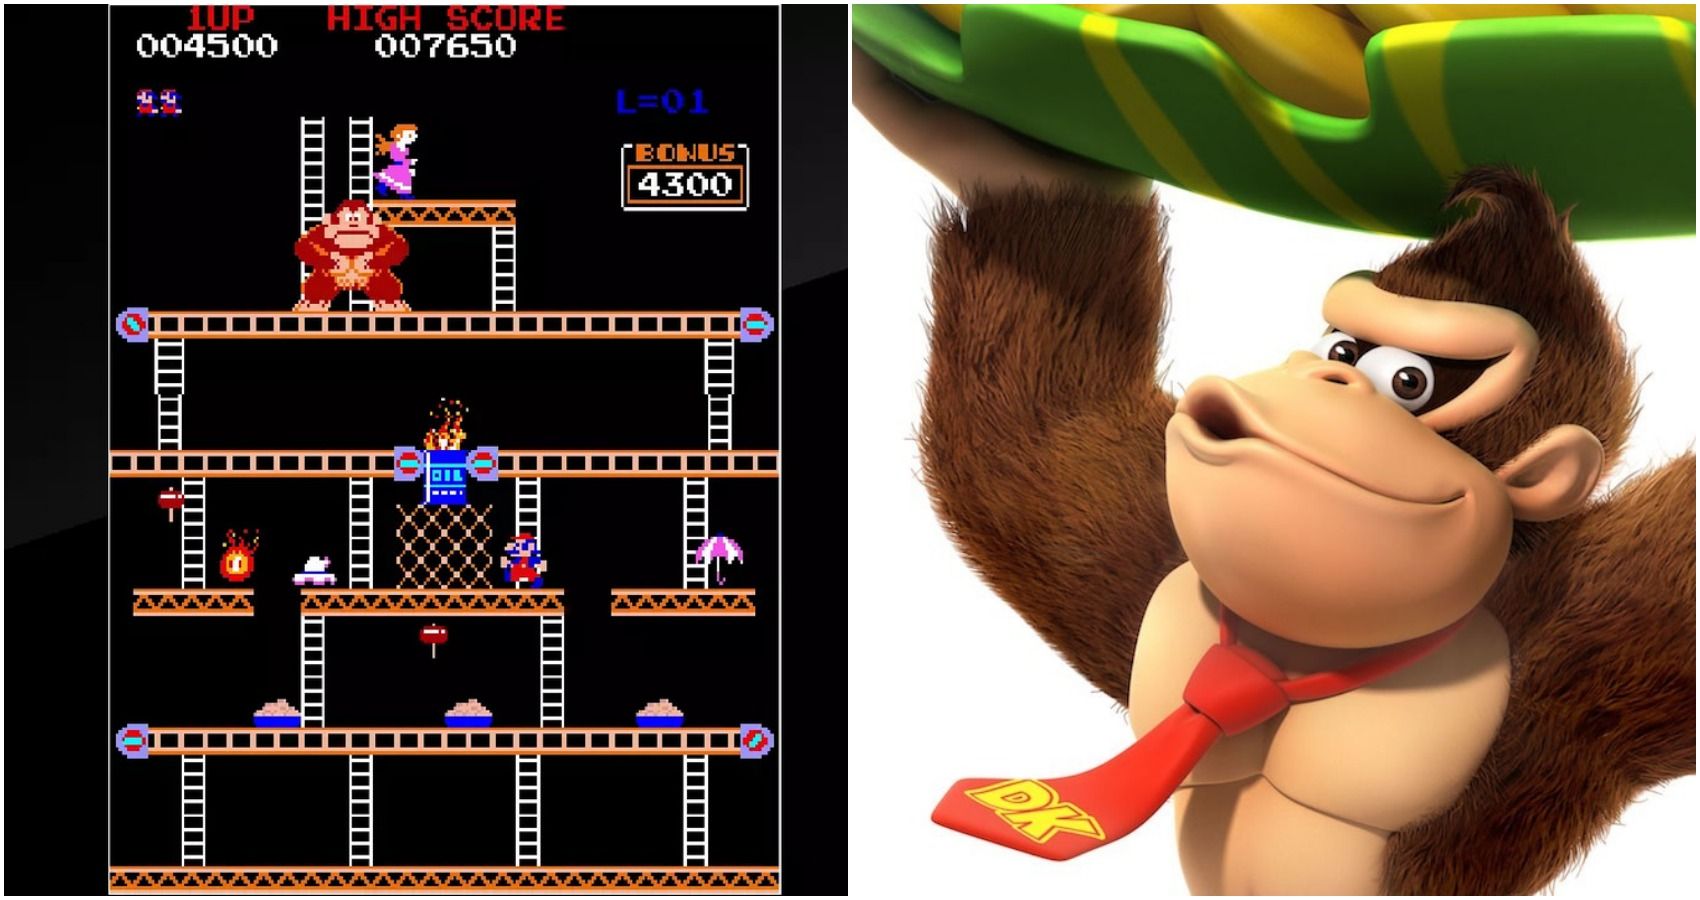 Donkey Kong: 10 Mind-Blowing Facts You Didn't Know About The